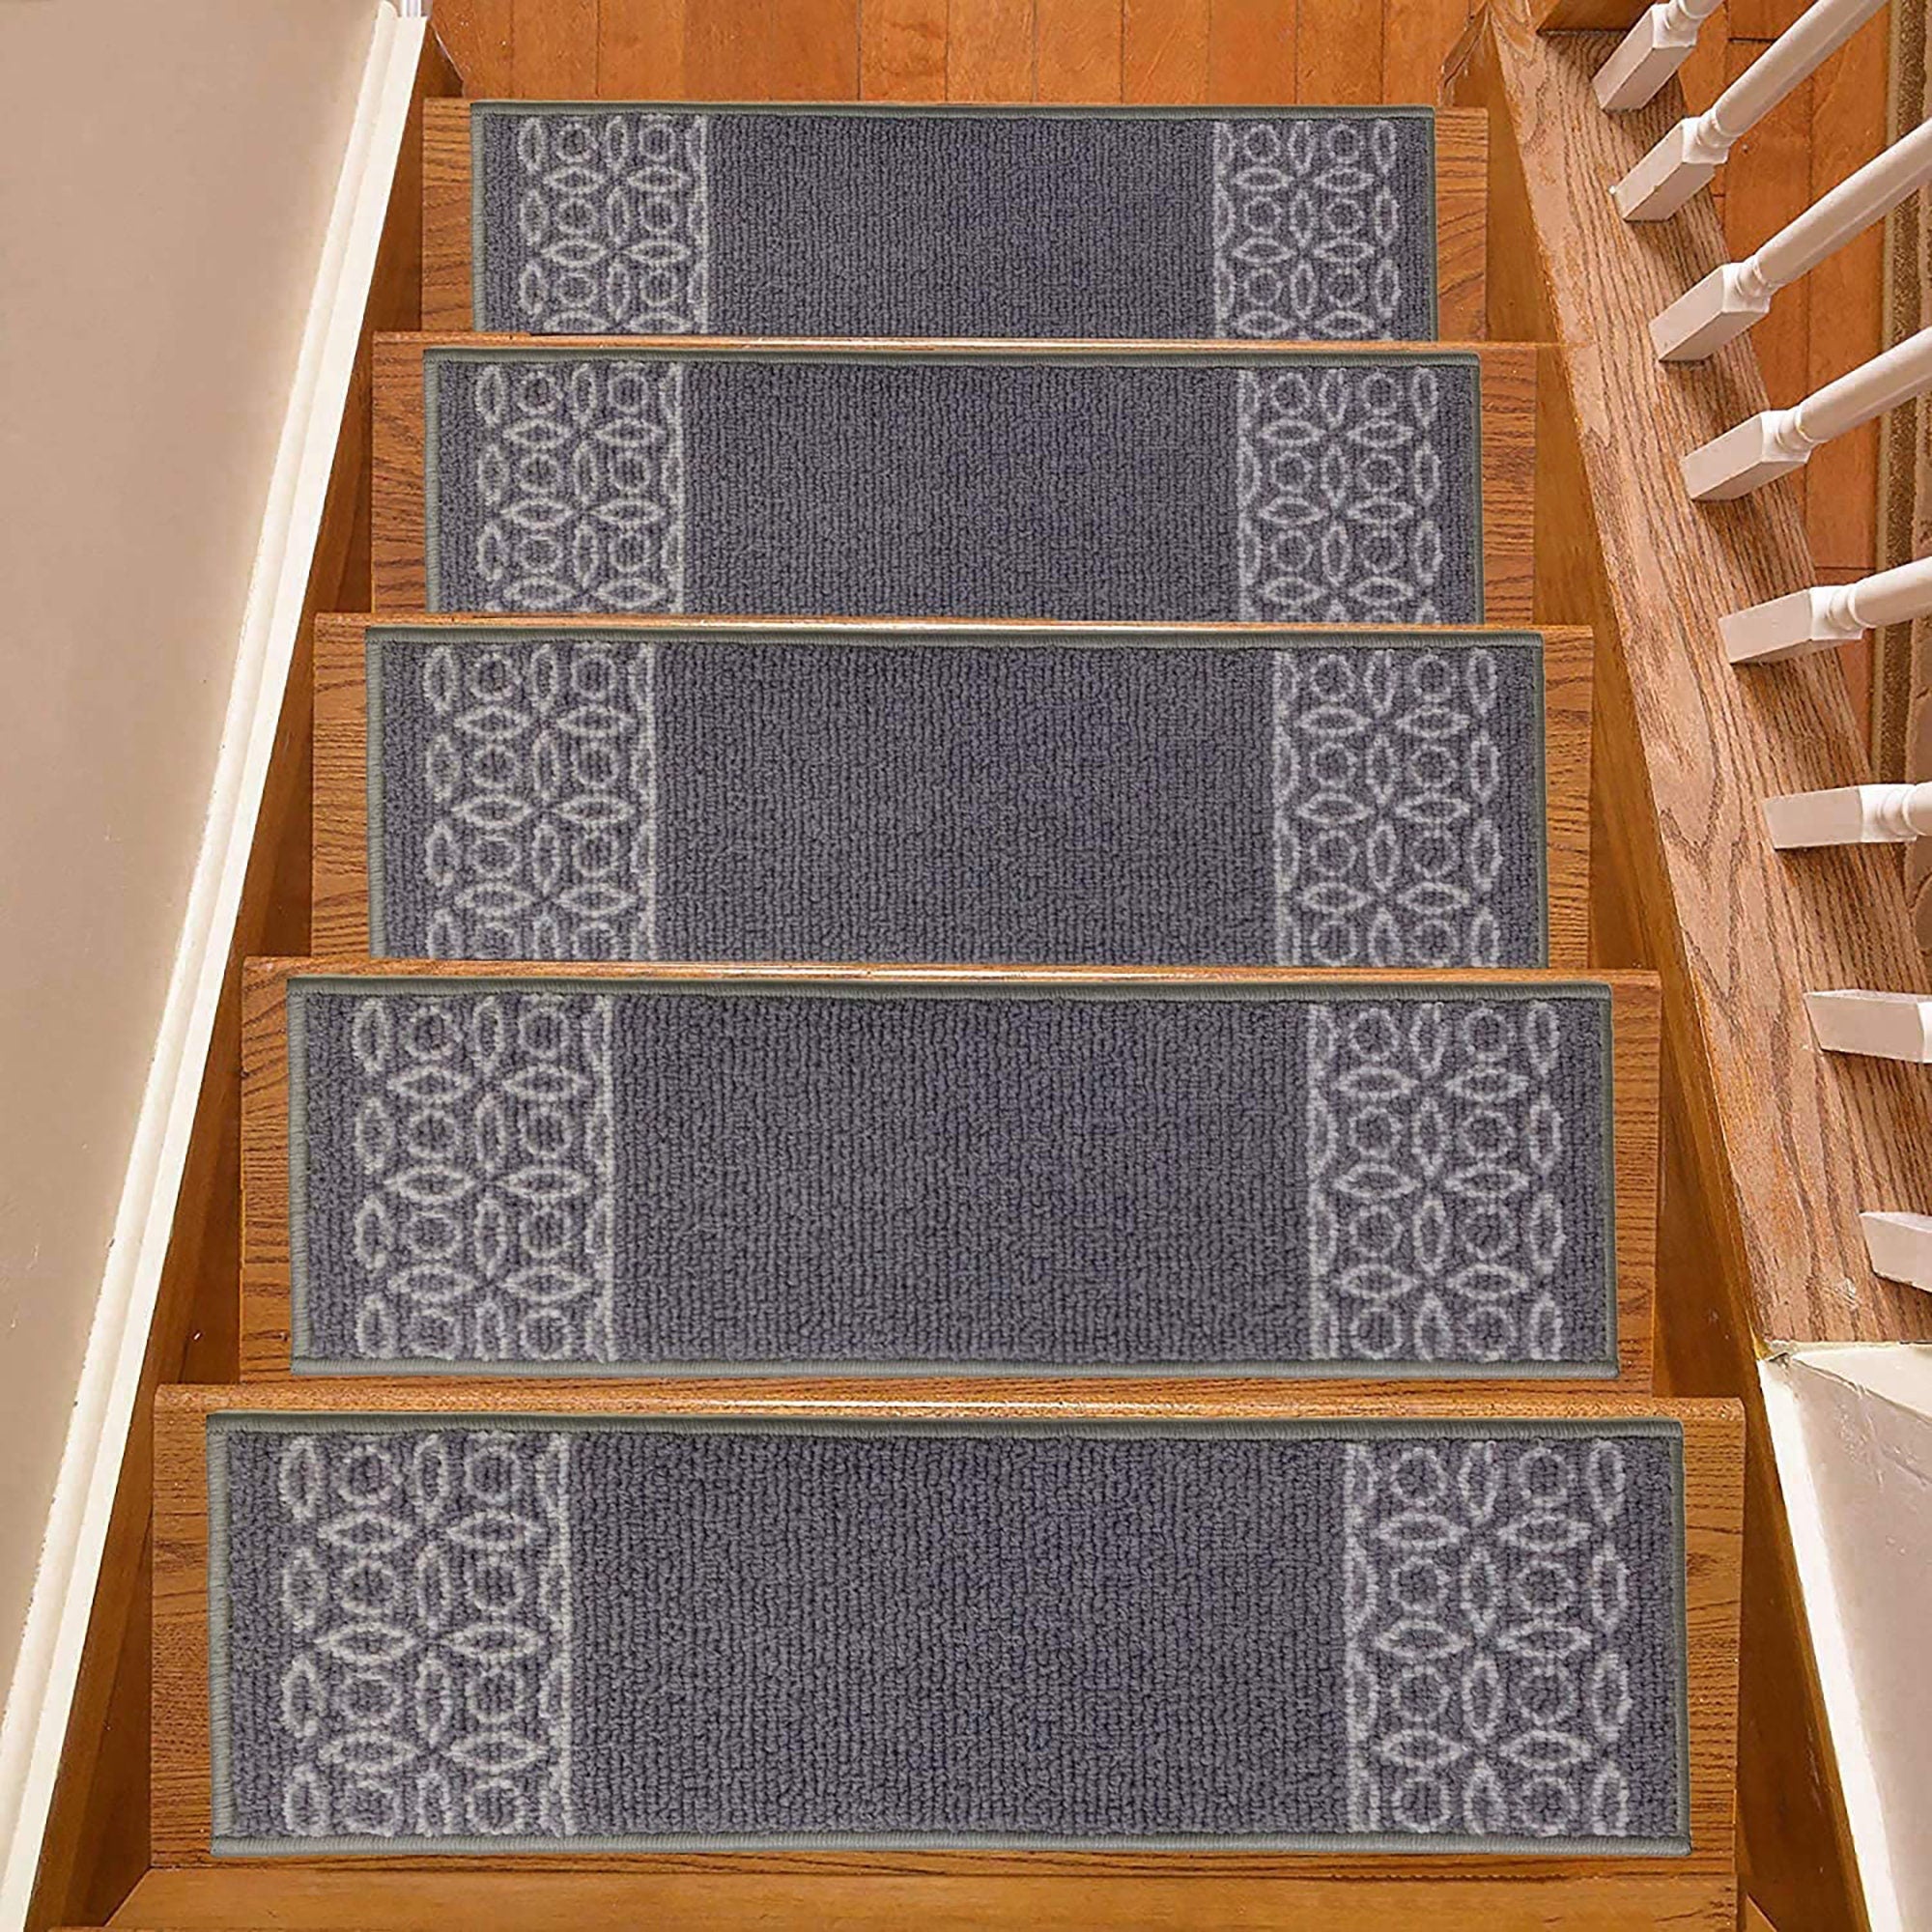 Machine Washable Berber Stair Tread Geometric Bordered Grey Skid Resistant Latex Back Carpet Stair Treads Size 9" x 30" Many Set Options